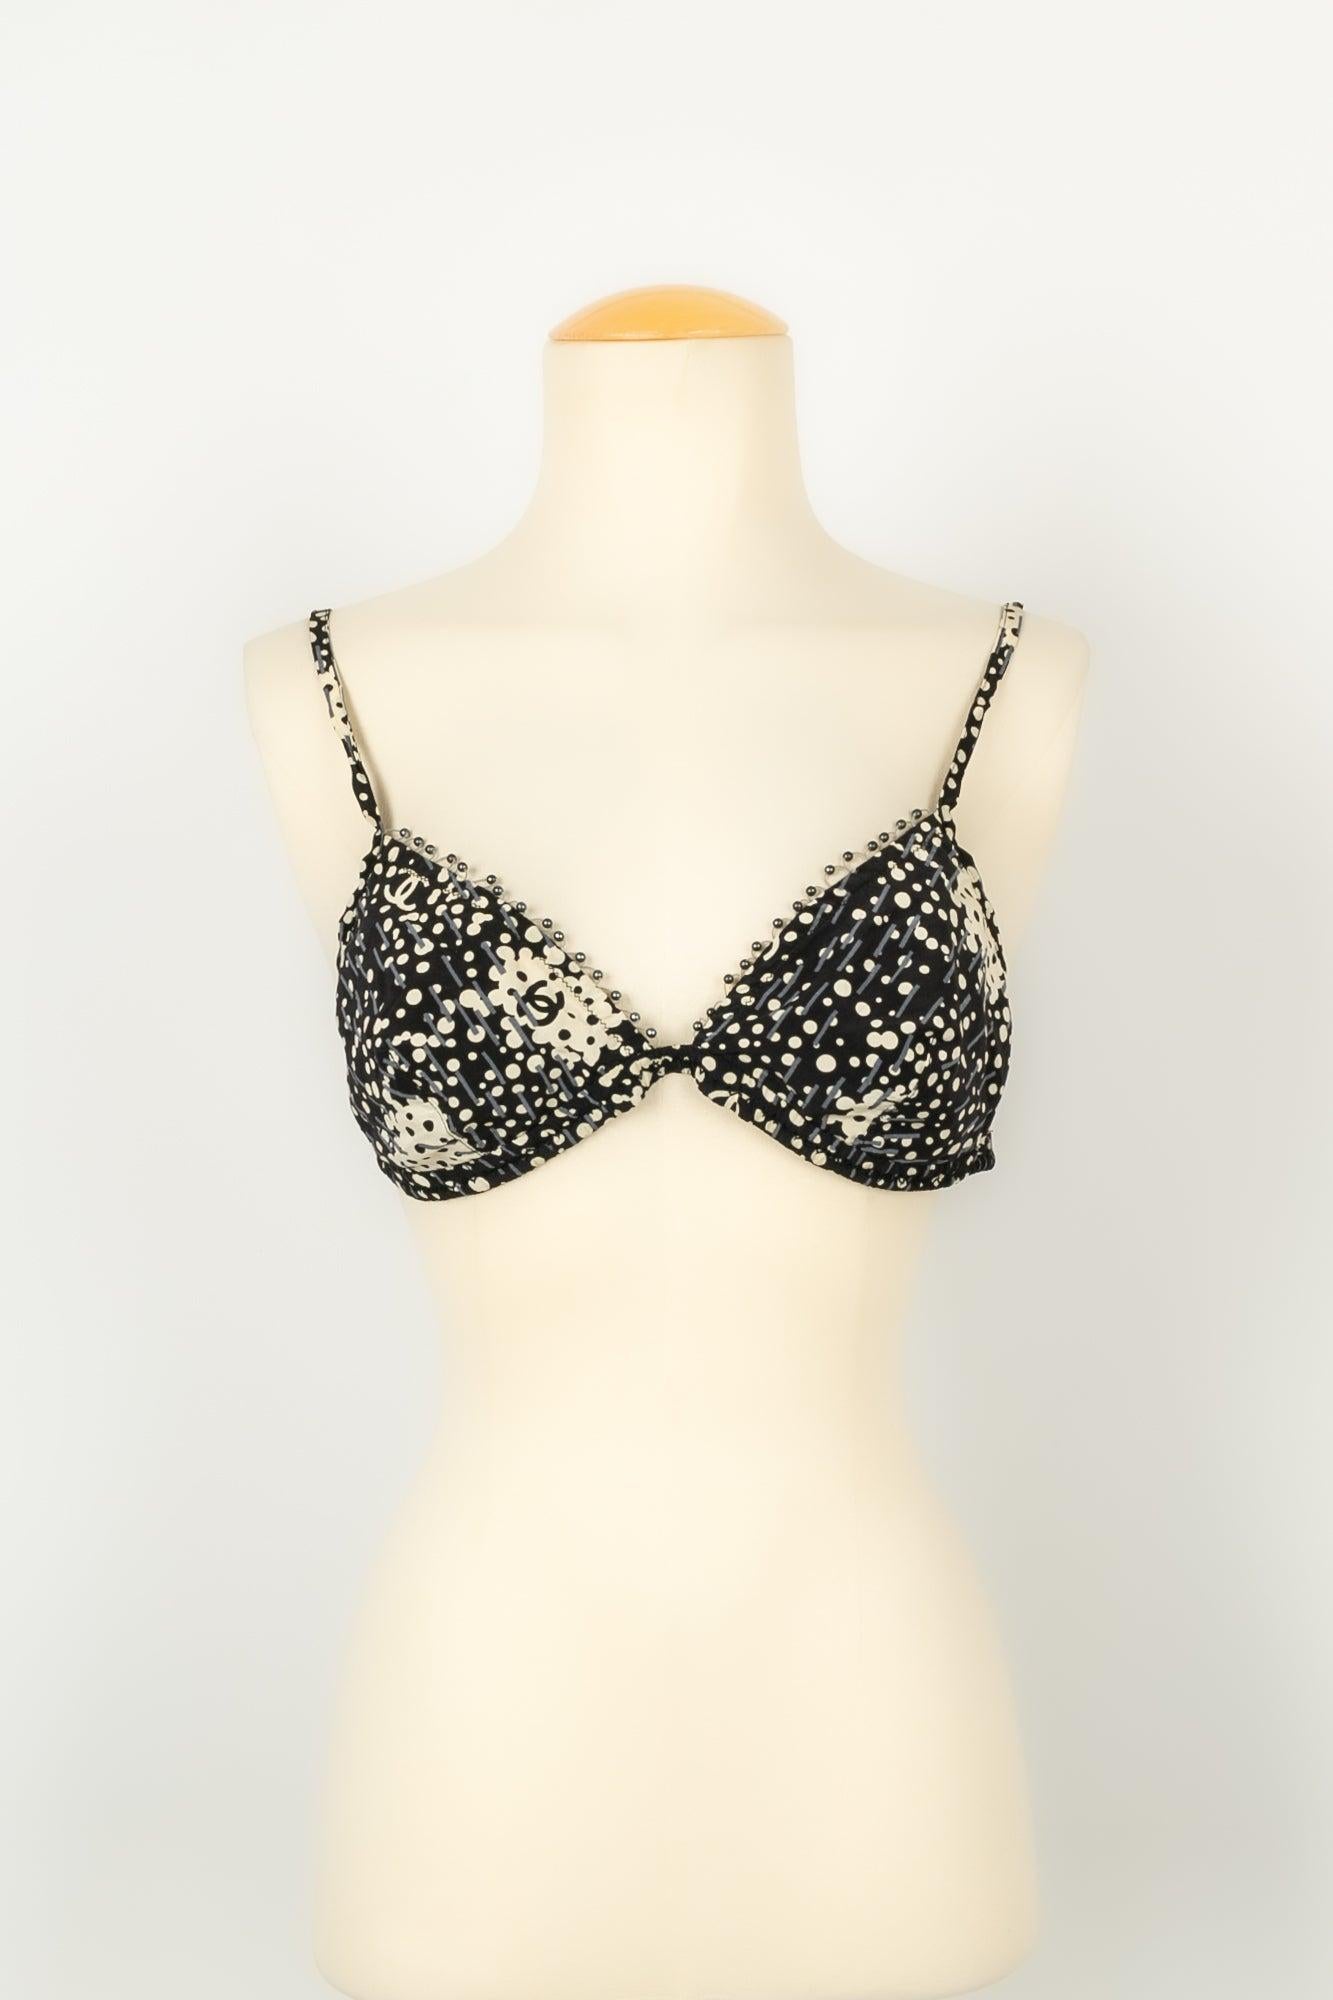 Chanel - (Made in Italy) Set of silk underwear, top in openwork black mesh inlaid with silk and pearls. Size 40FR/42FR. Fall/Winter 2002 Collection.

Additional information:
Condition: Very good condition
Dimensions: Top: Chest: 40 cm - Length: 45